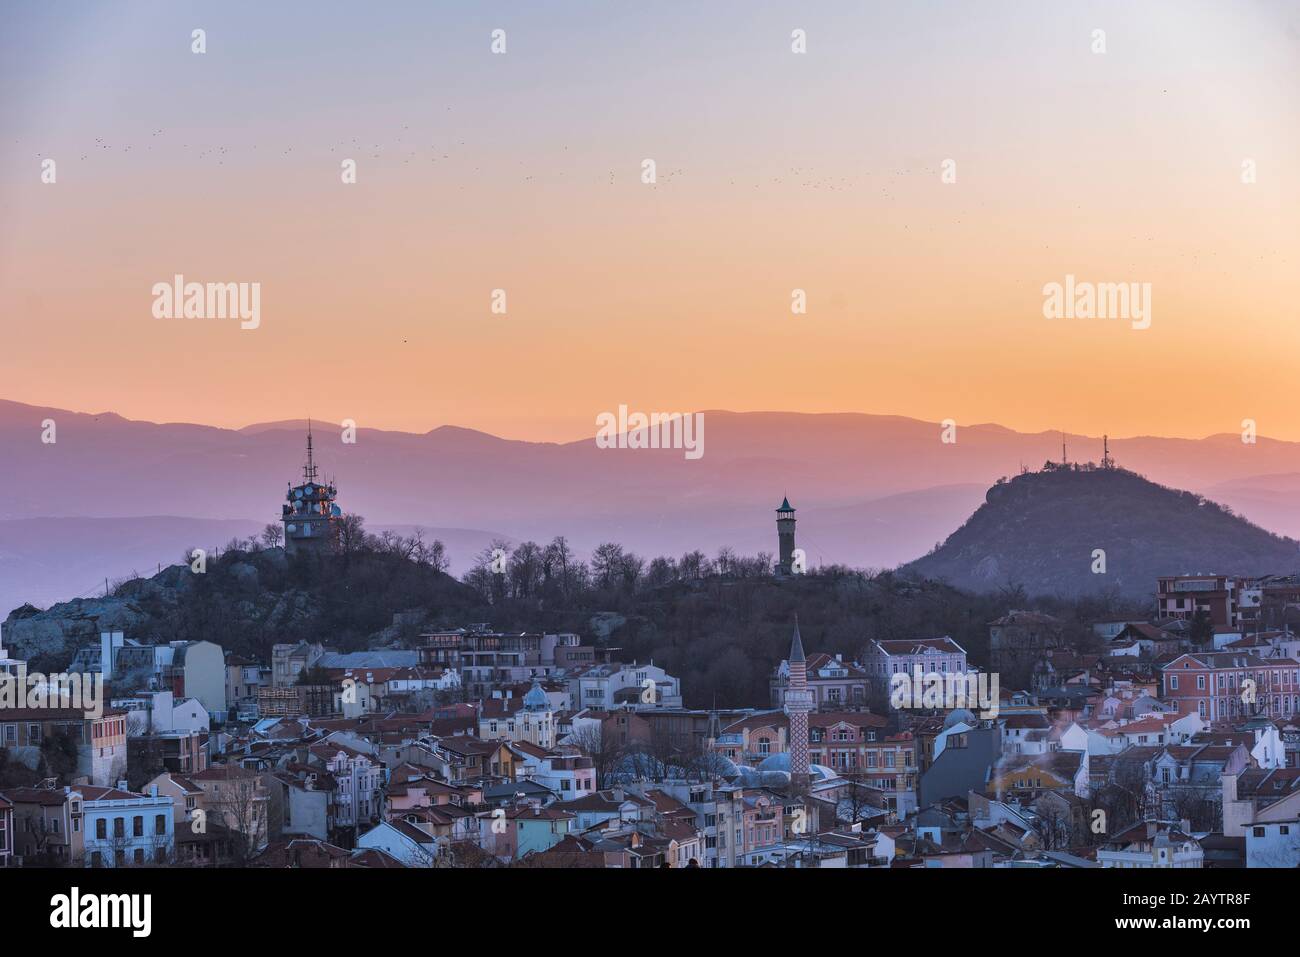 Summer sunset cityscape from Nebet tepe Hill in Plovdiv city, Bulgaria. Panoramic aerial view. Ancient Plovdiv is UNESCO's World Heritage and the olde Stock Photo